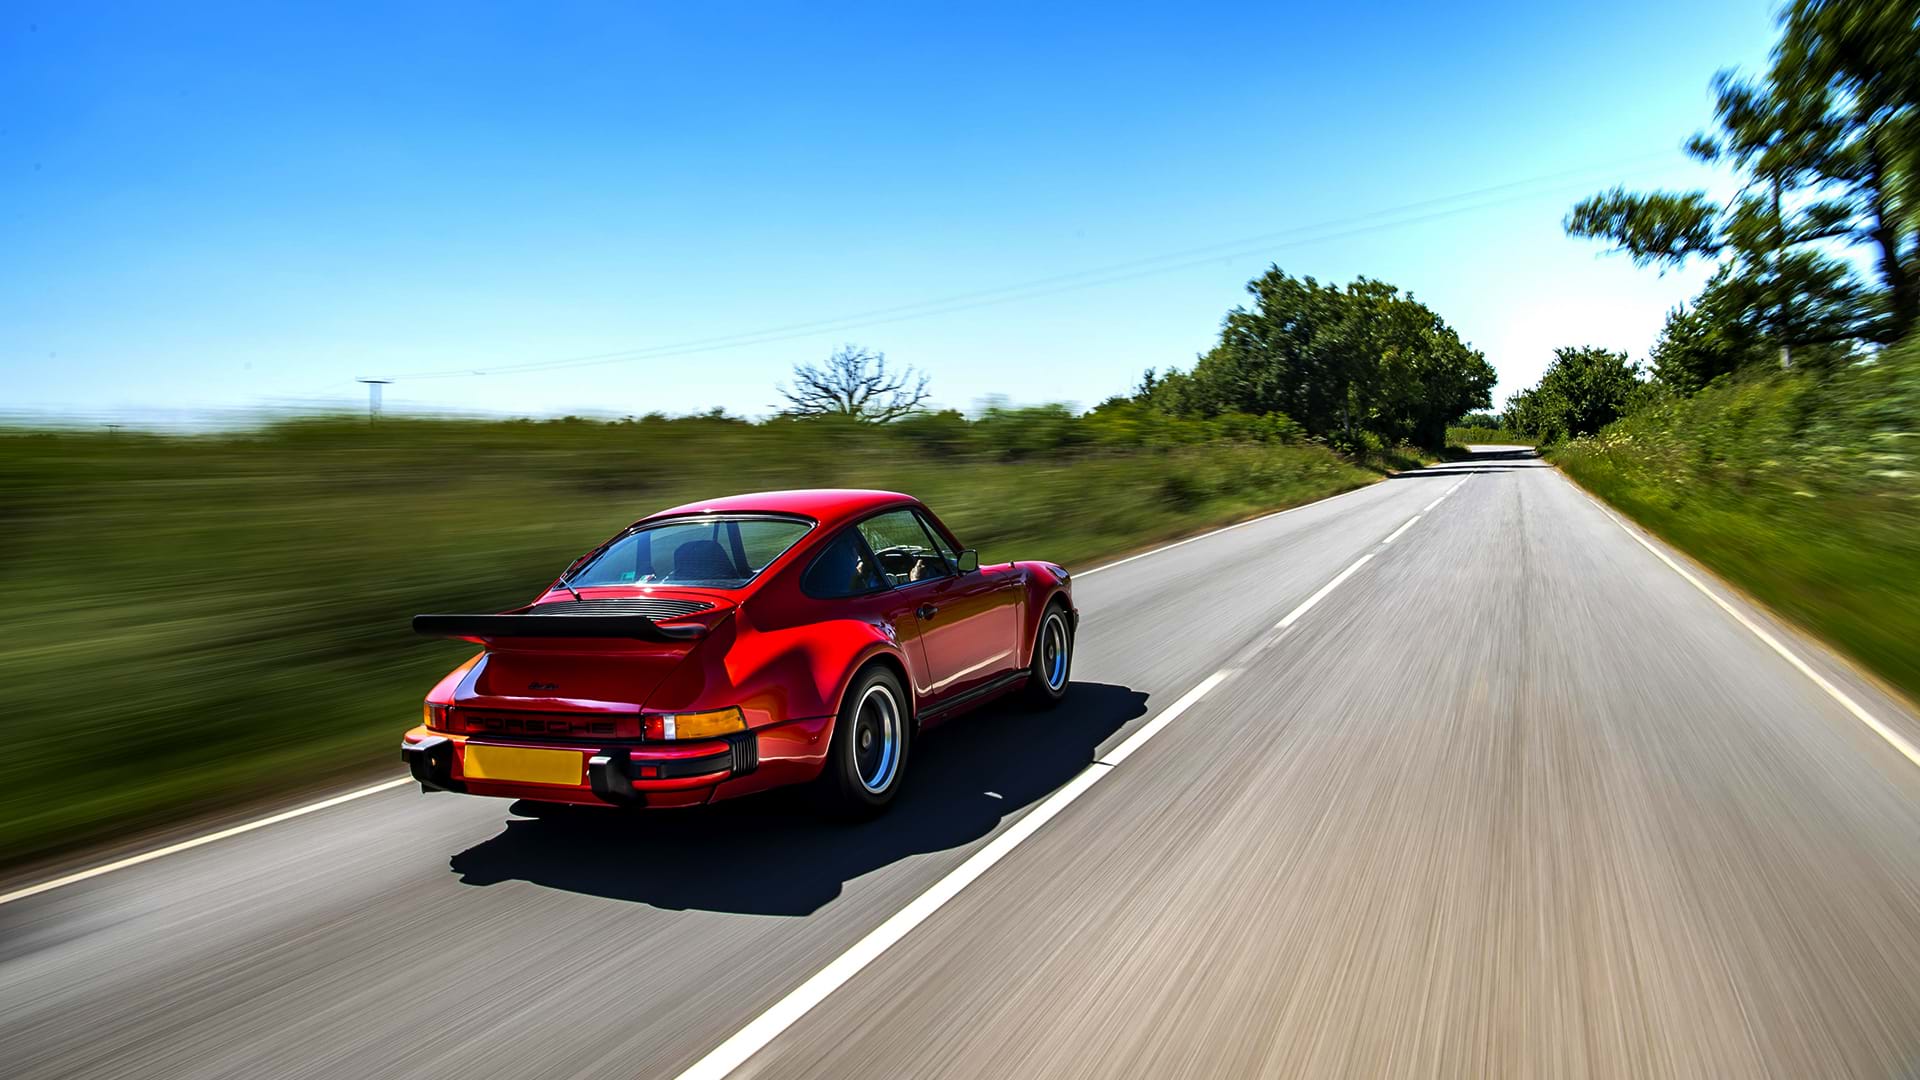 Vintage red Porsche 930 Turbo roaring down a beautiful country road on a sunny day.